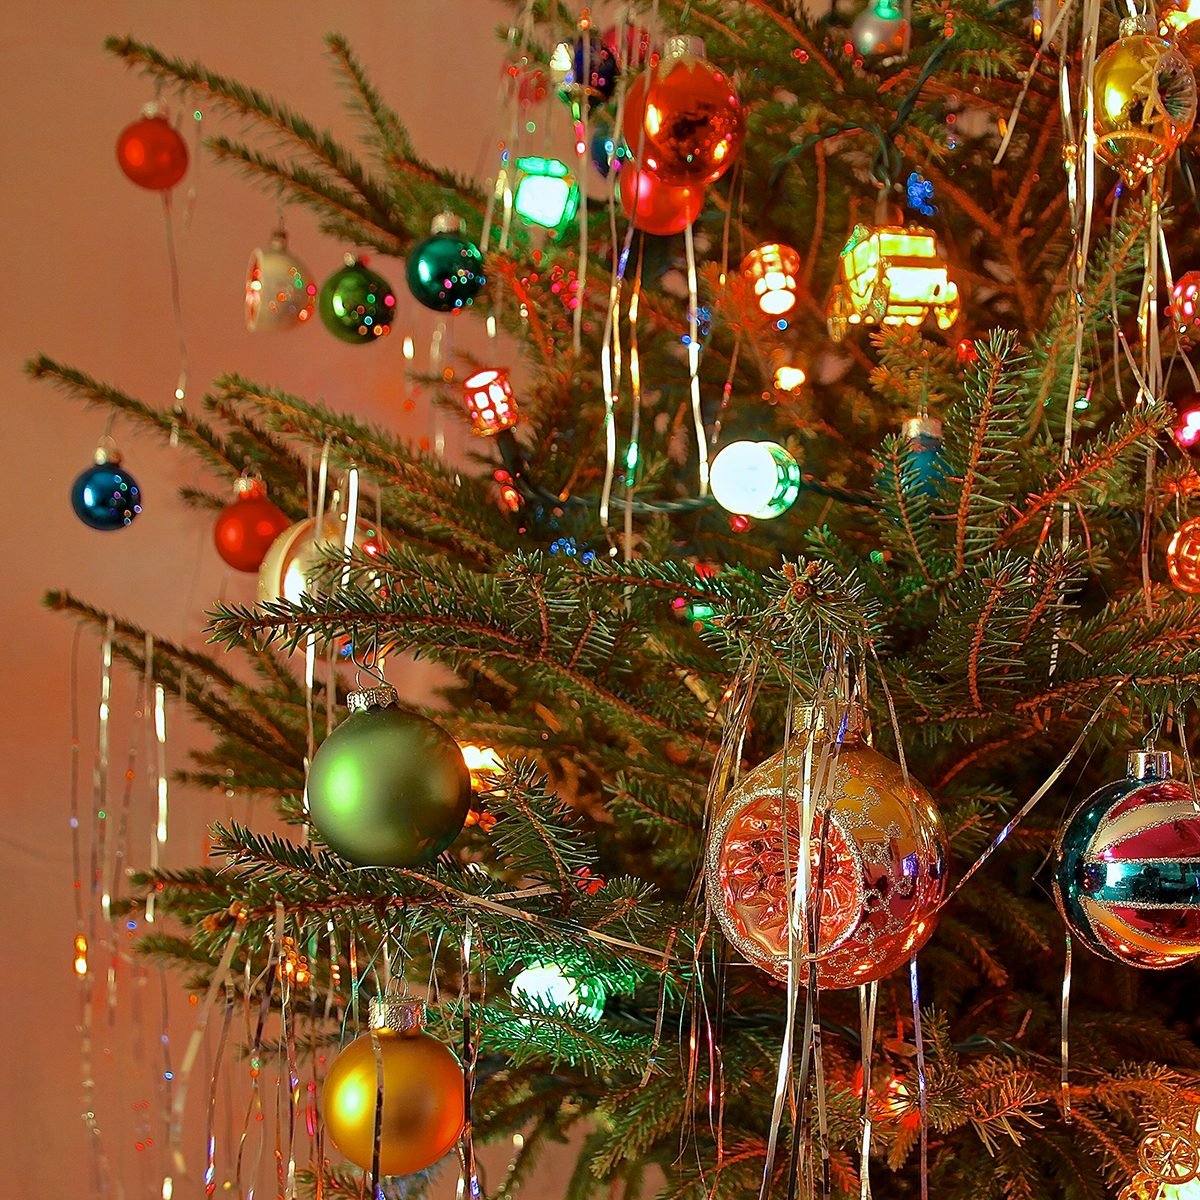 13 Vintage Christmas Decorations We Love for the Holidays